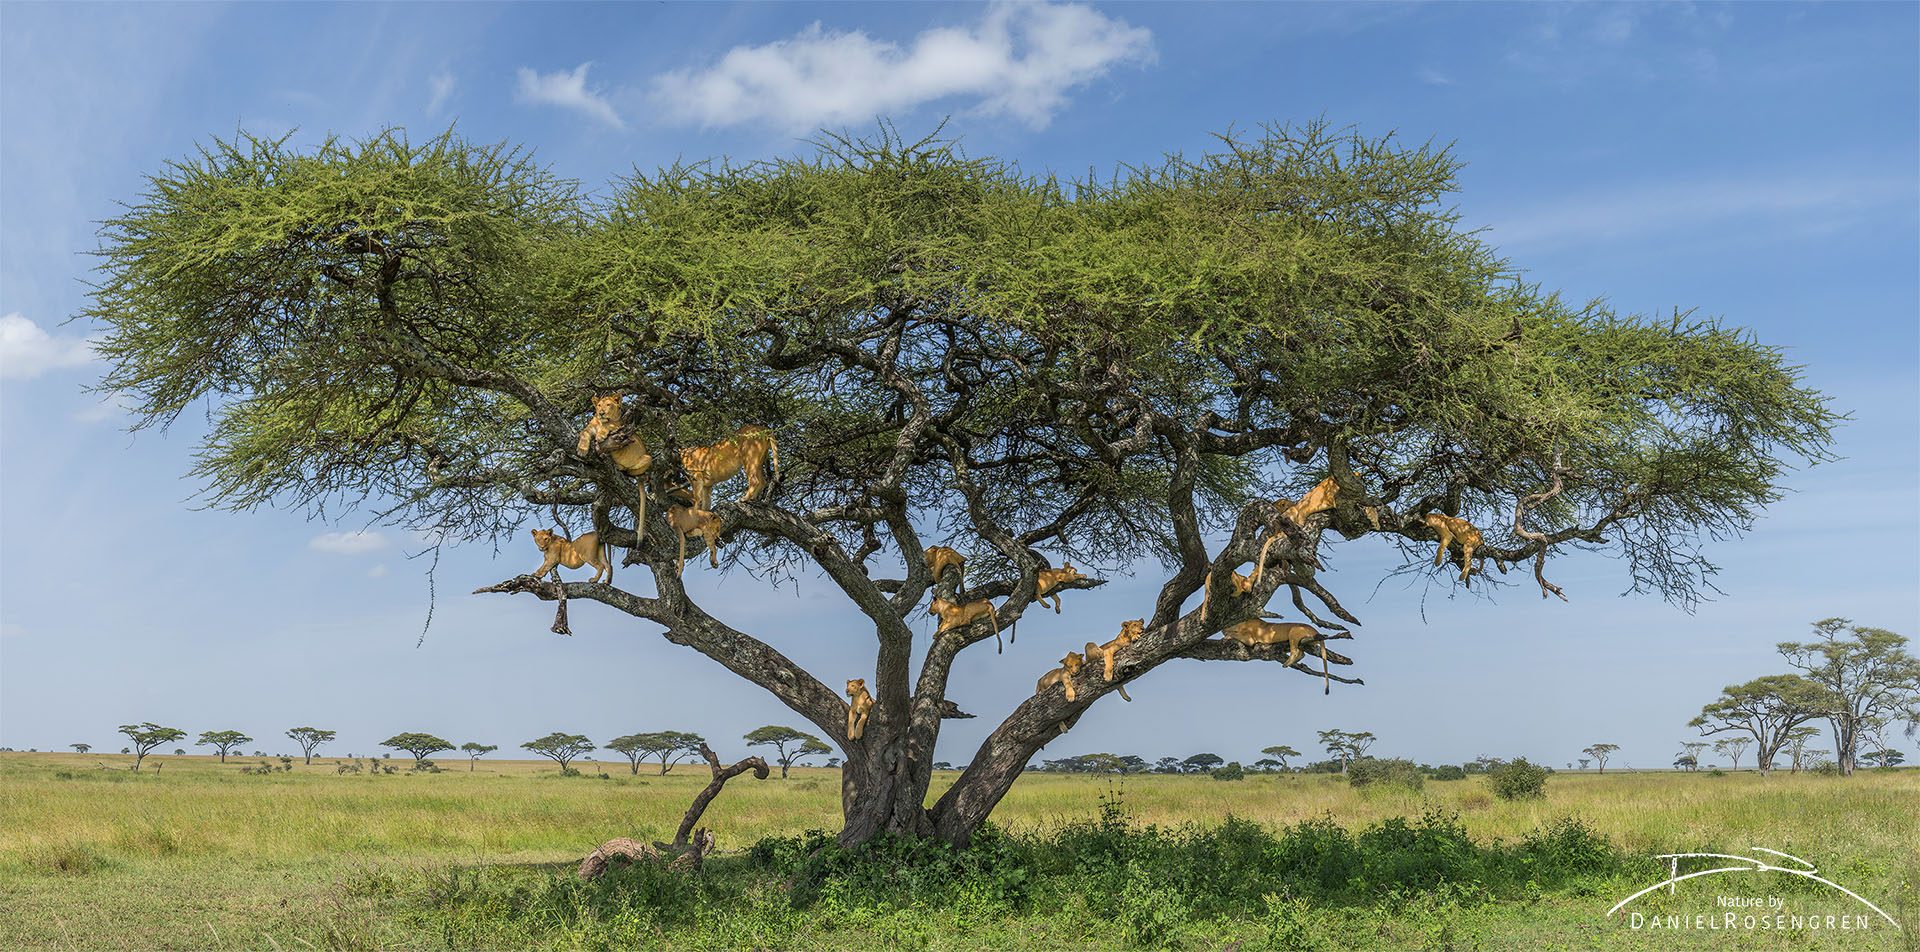 16 lions in an Acacia tree, this photo has been stitched together from four individual photos. © Daniel Rosengren